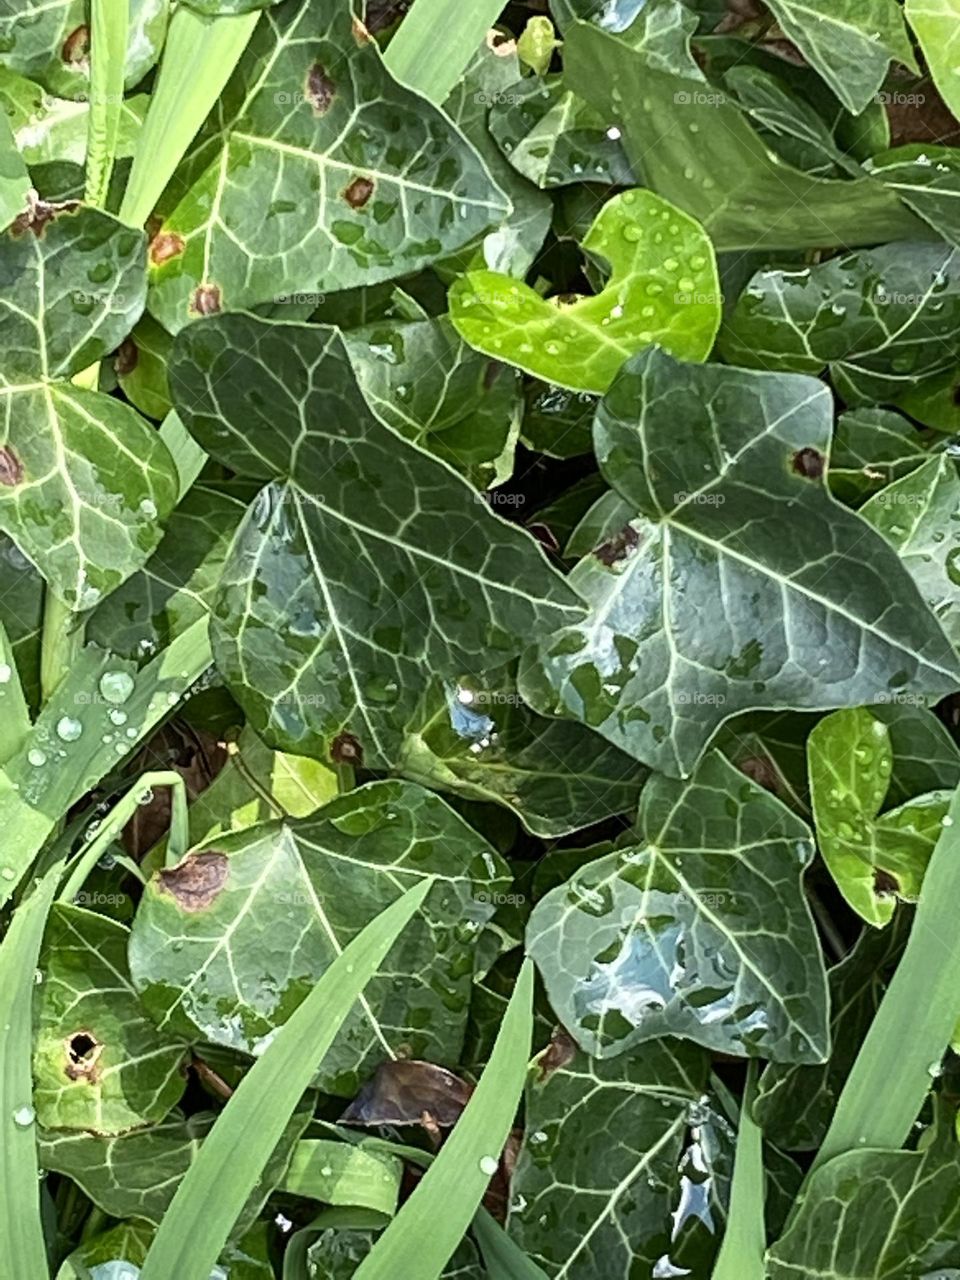 Leaves form a pleasing pattern with water droplets enhancing their natural beauty. Shades of green that are very calming to look at. Nature’s art on display! Lovely!